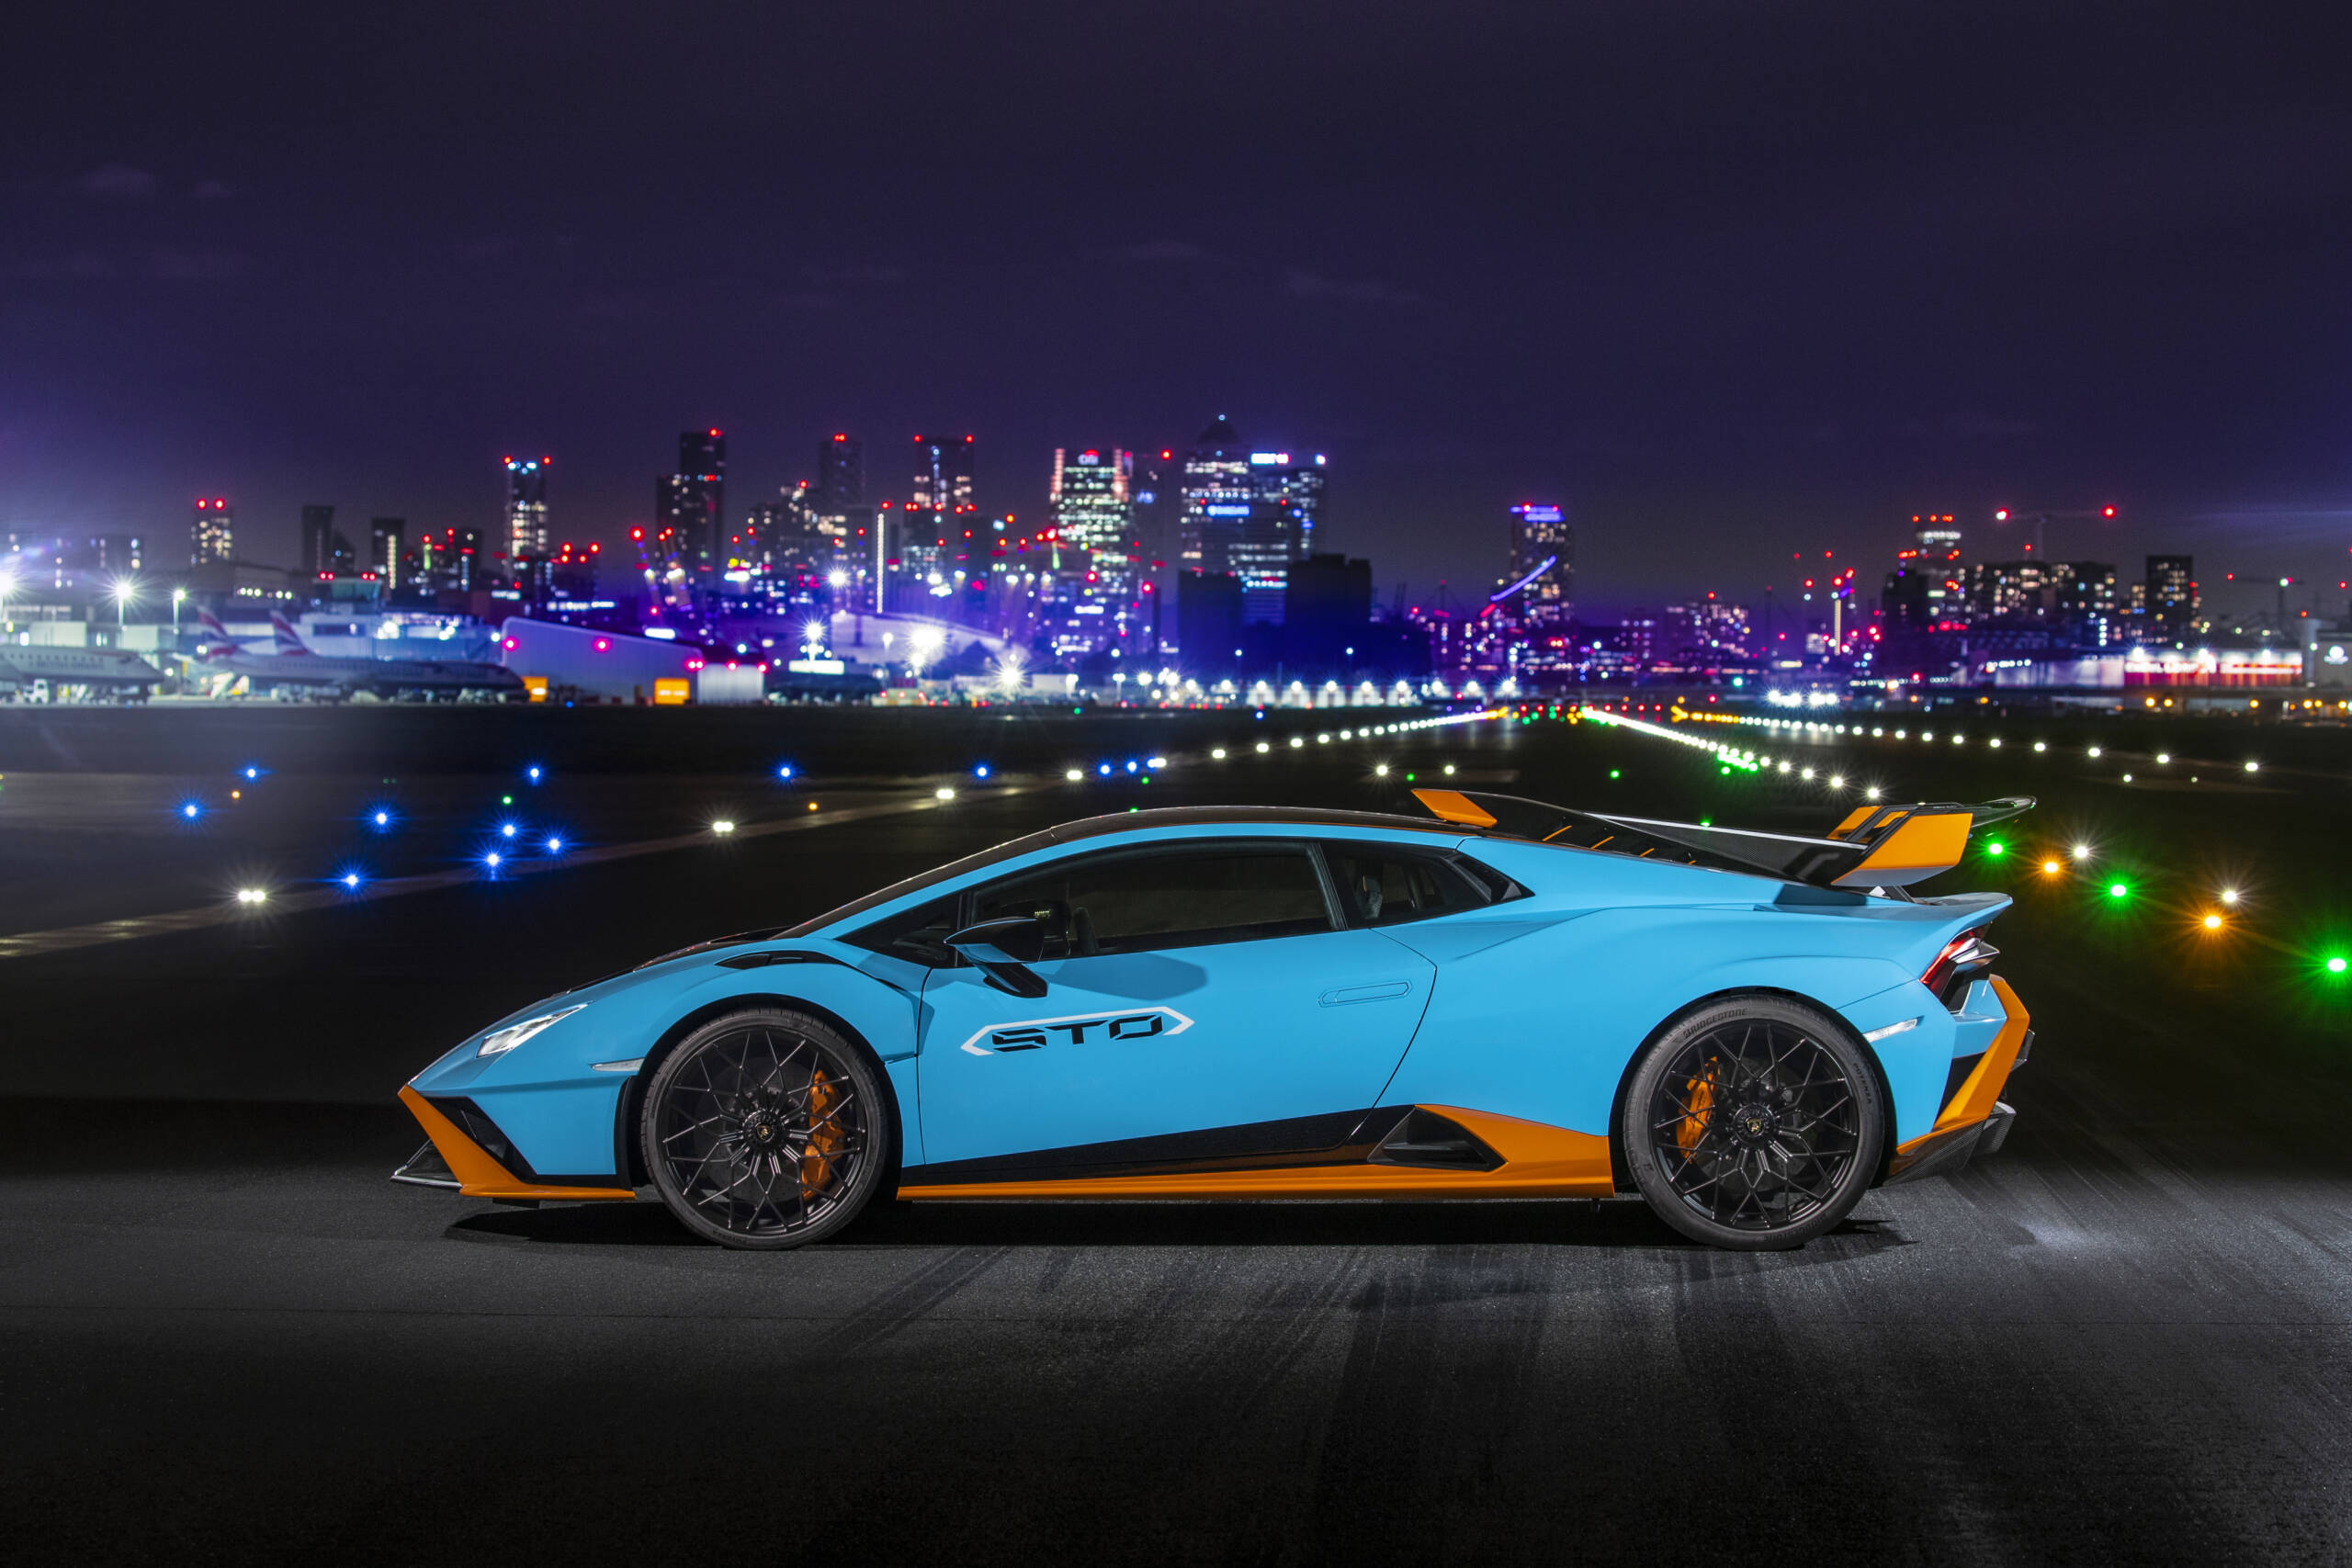 A blue and orange Lamborghini on a road at night with a lit up skyline behind it